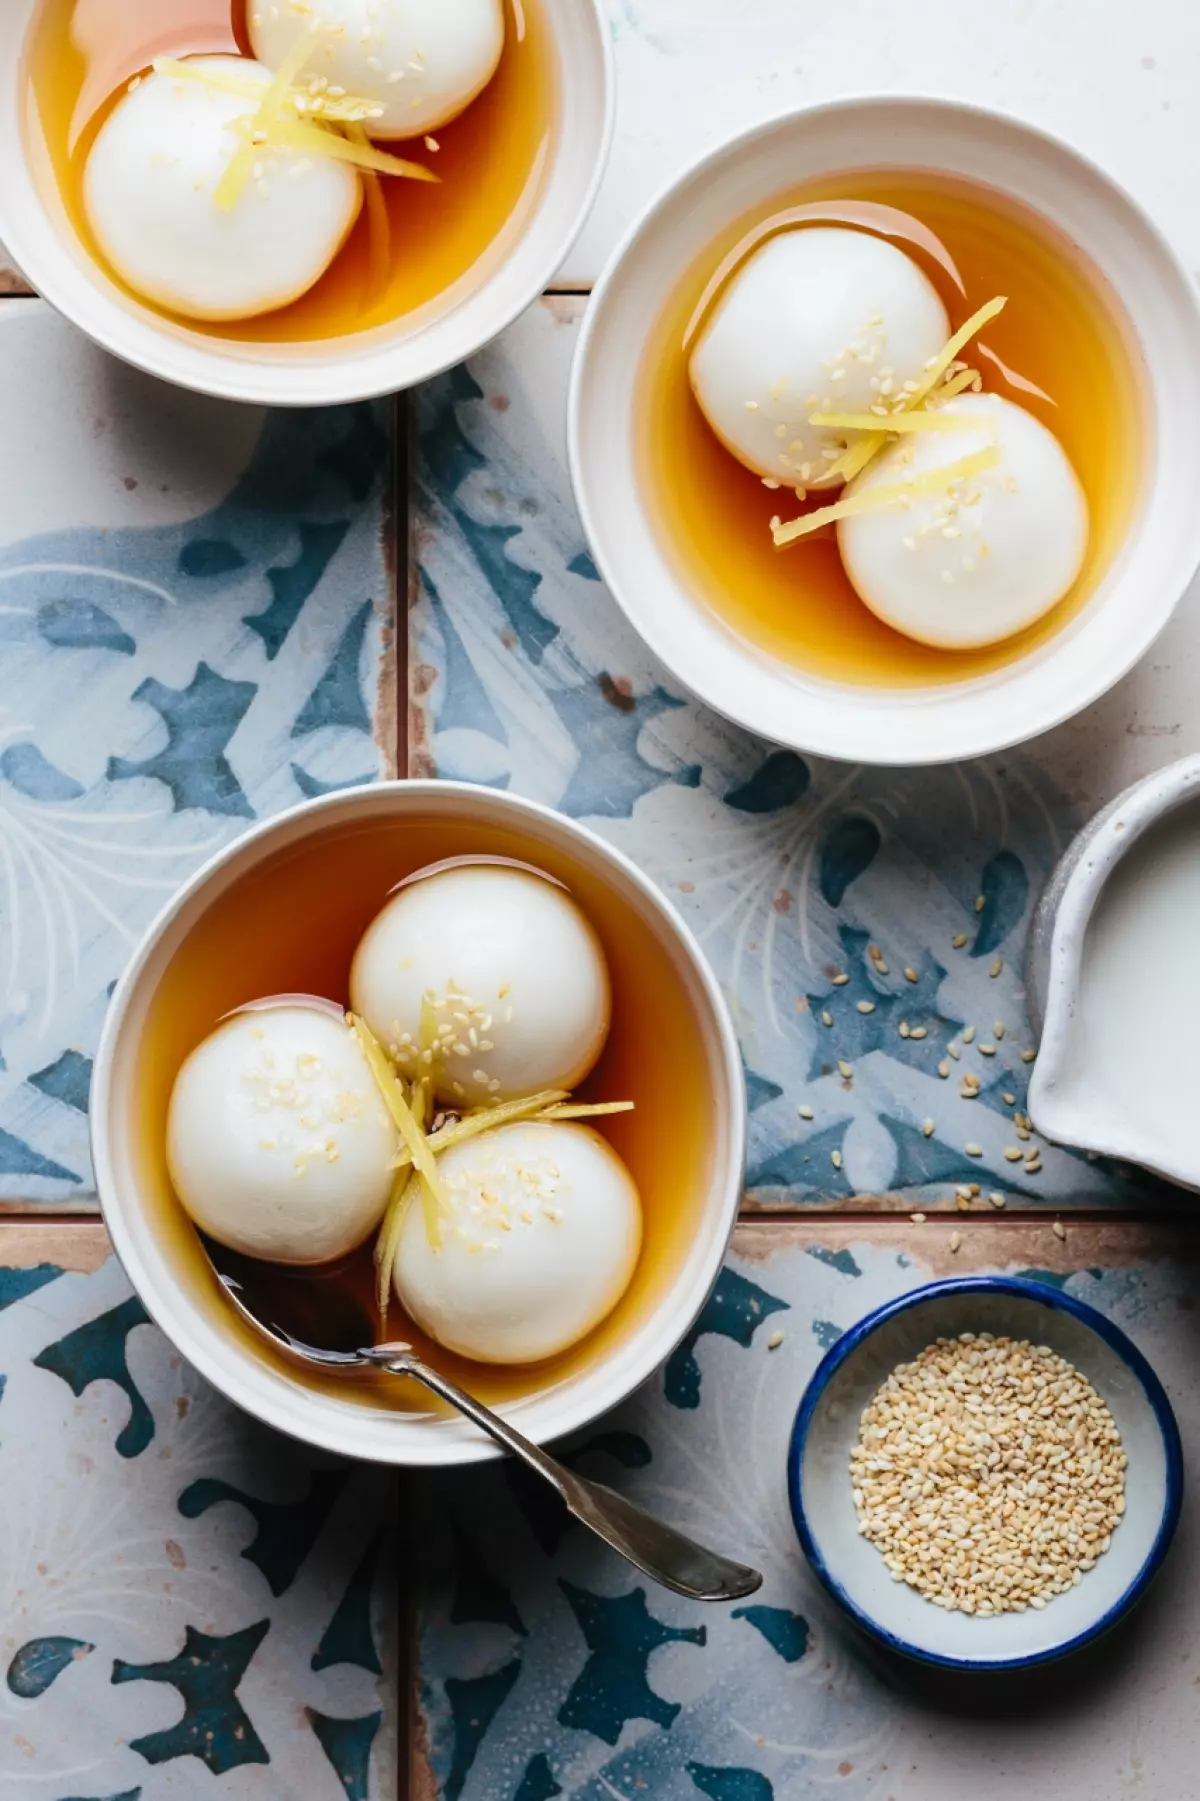 Three bowls of Vietnamese glutinous rice balls in a warm ginger syrup with a cup of coconut sauce and a bowl of toasted sesame seeds